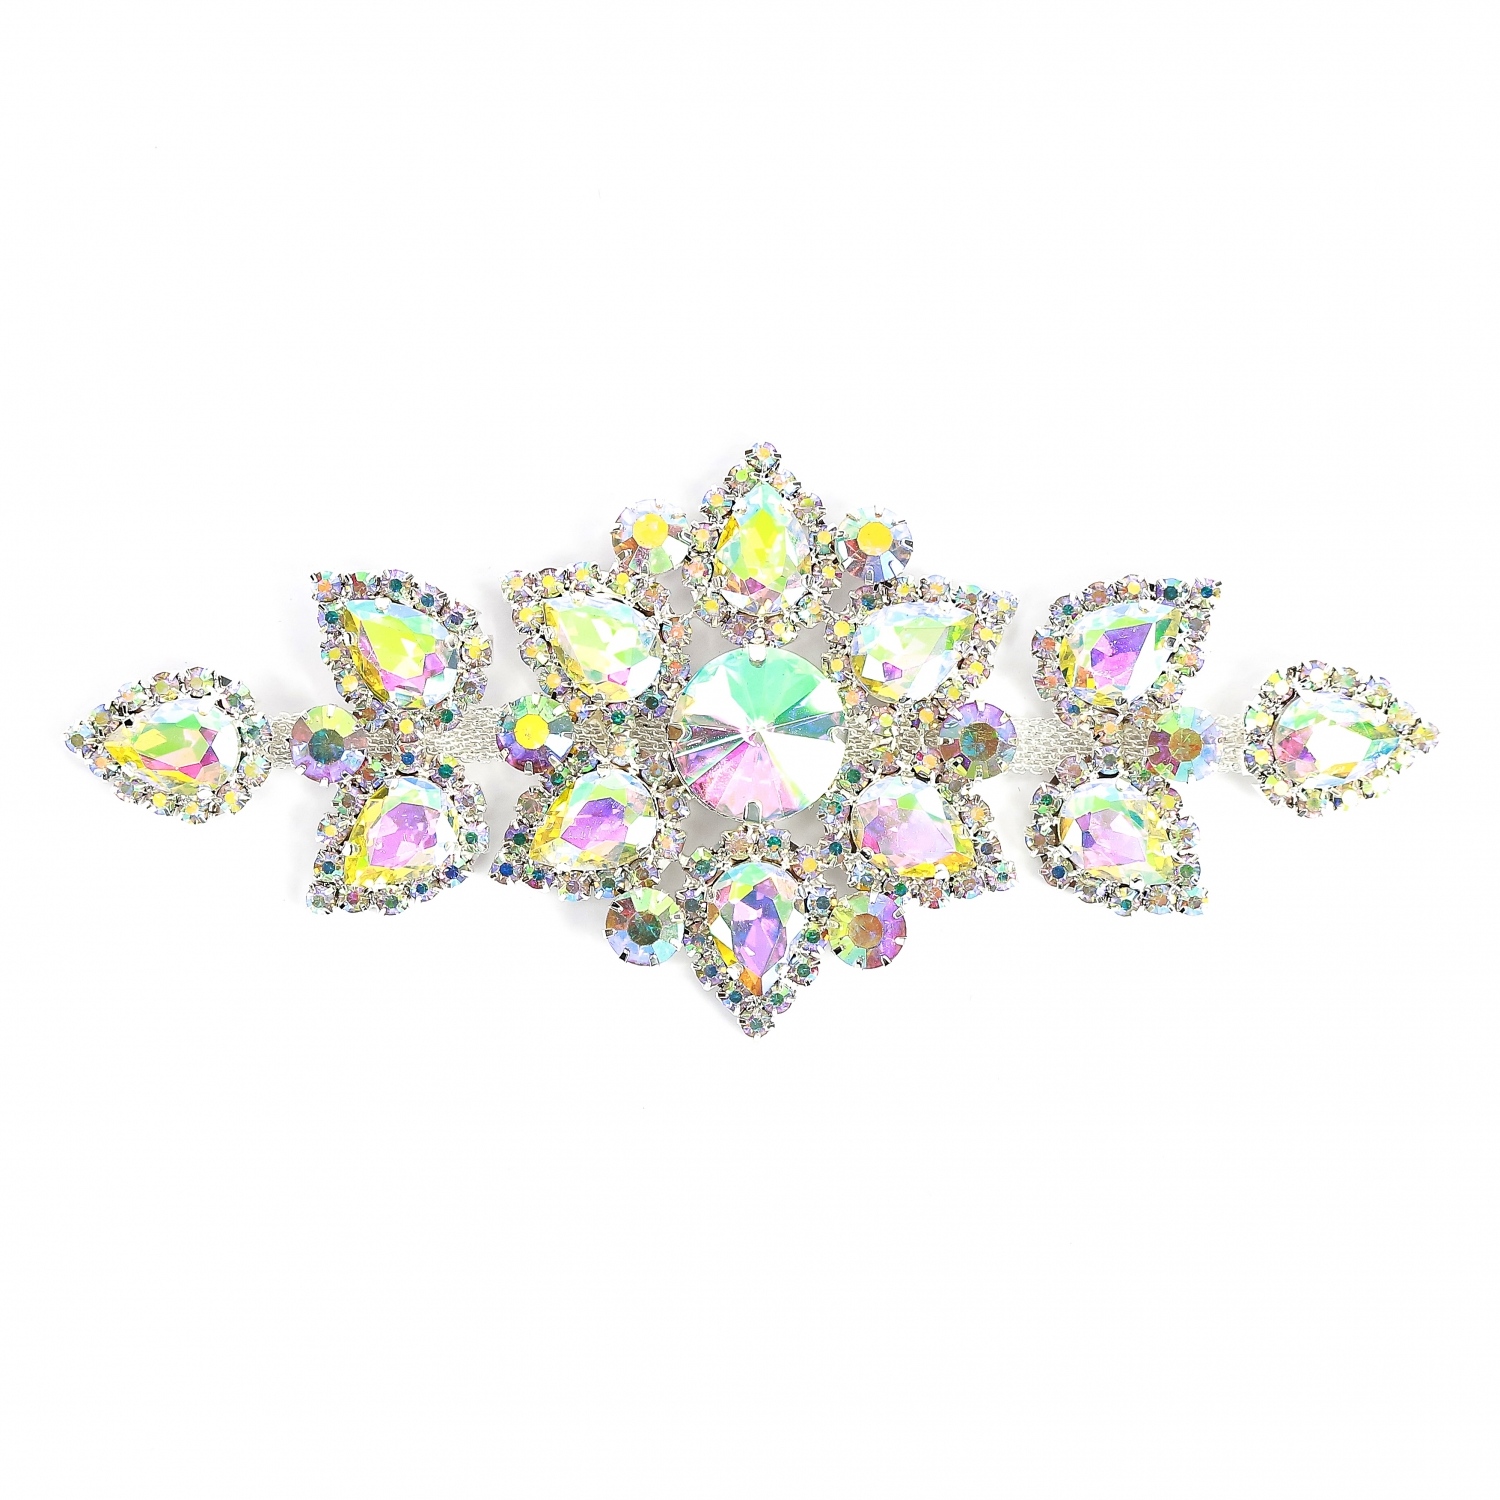 Applications with Glass Rhinestoness, 14.7x6.3 cm (1 pcs/pack) Code: BW-51